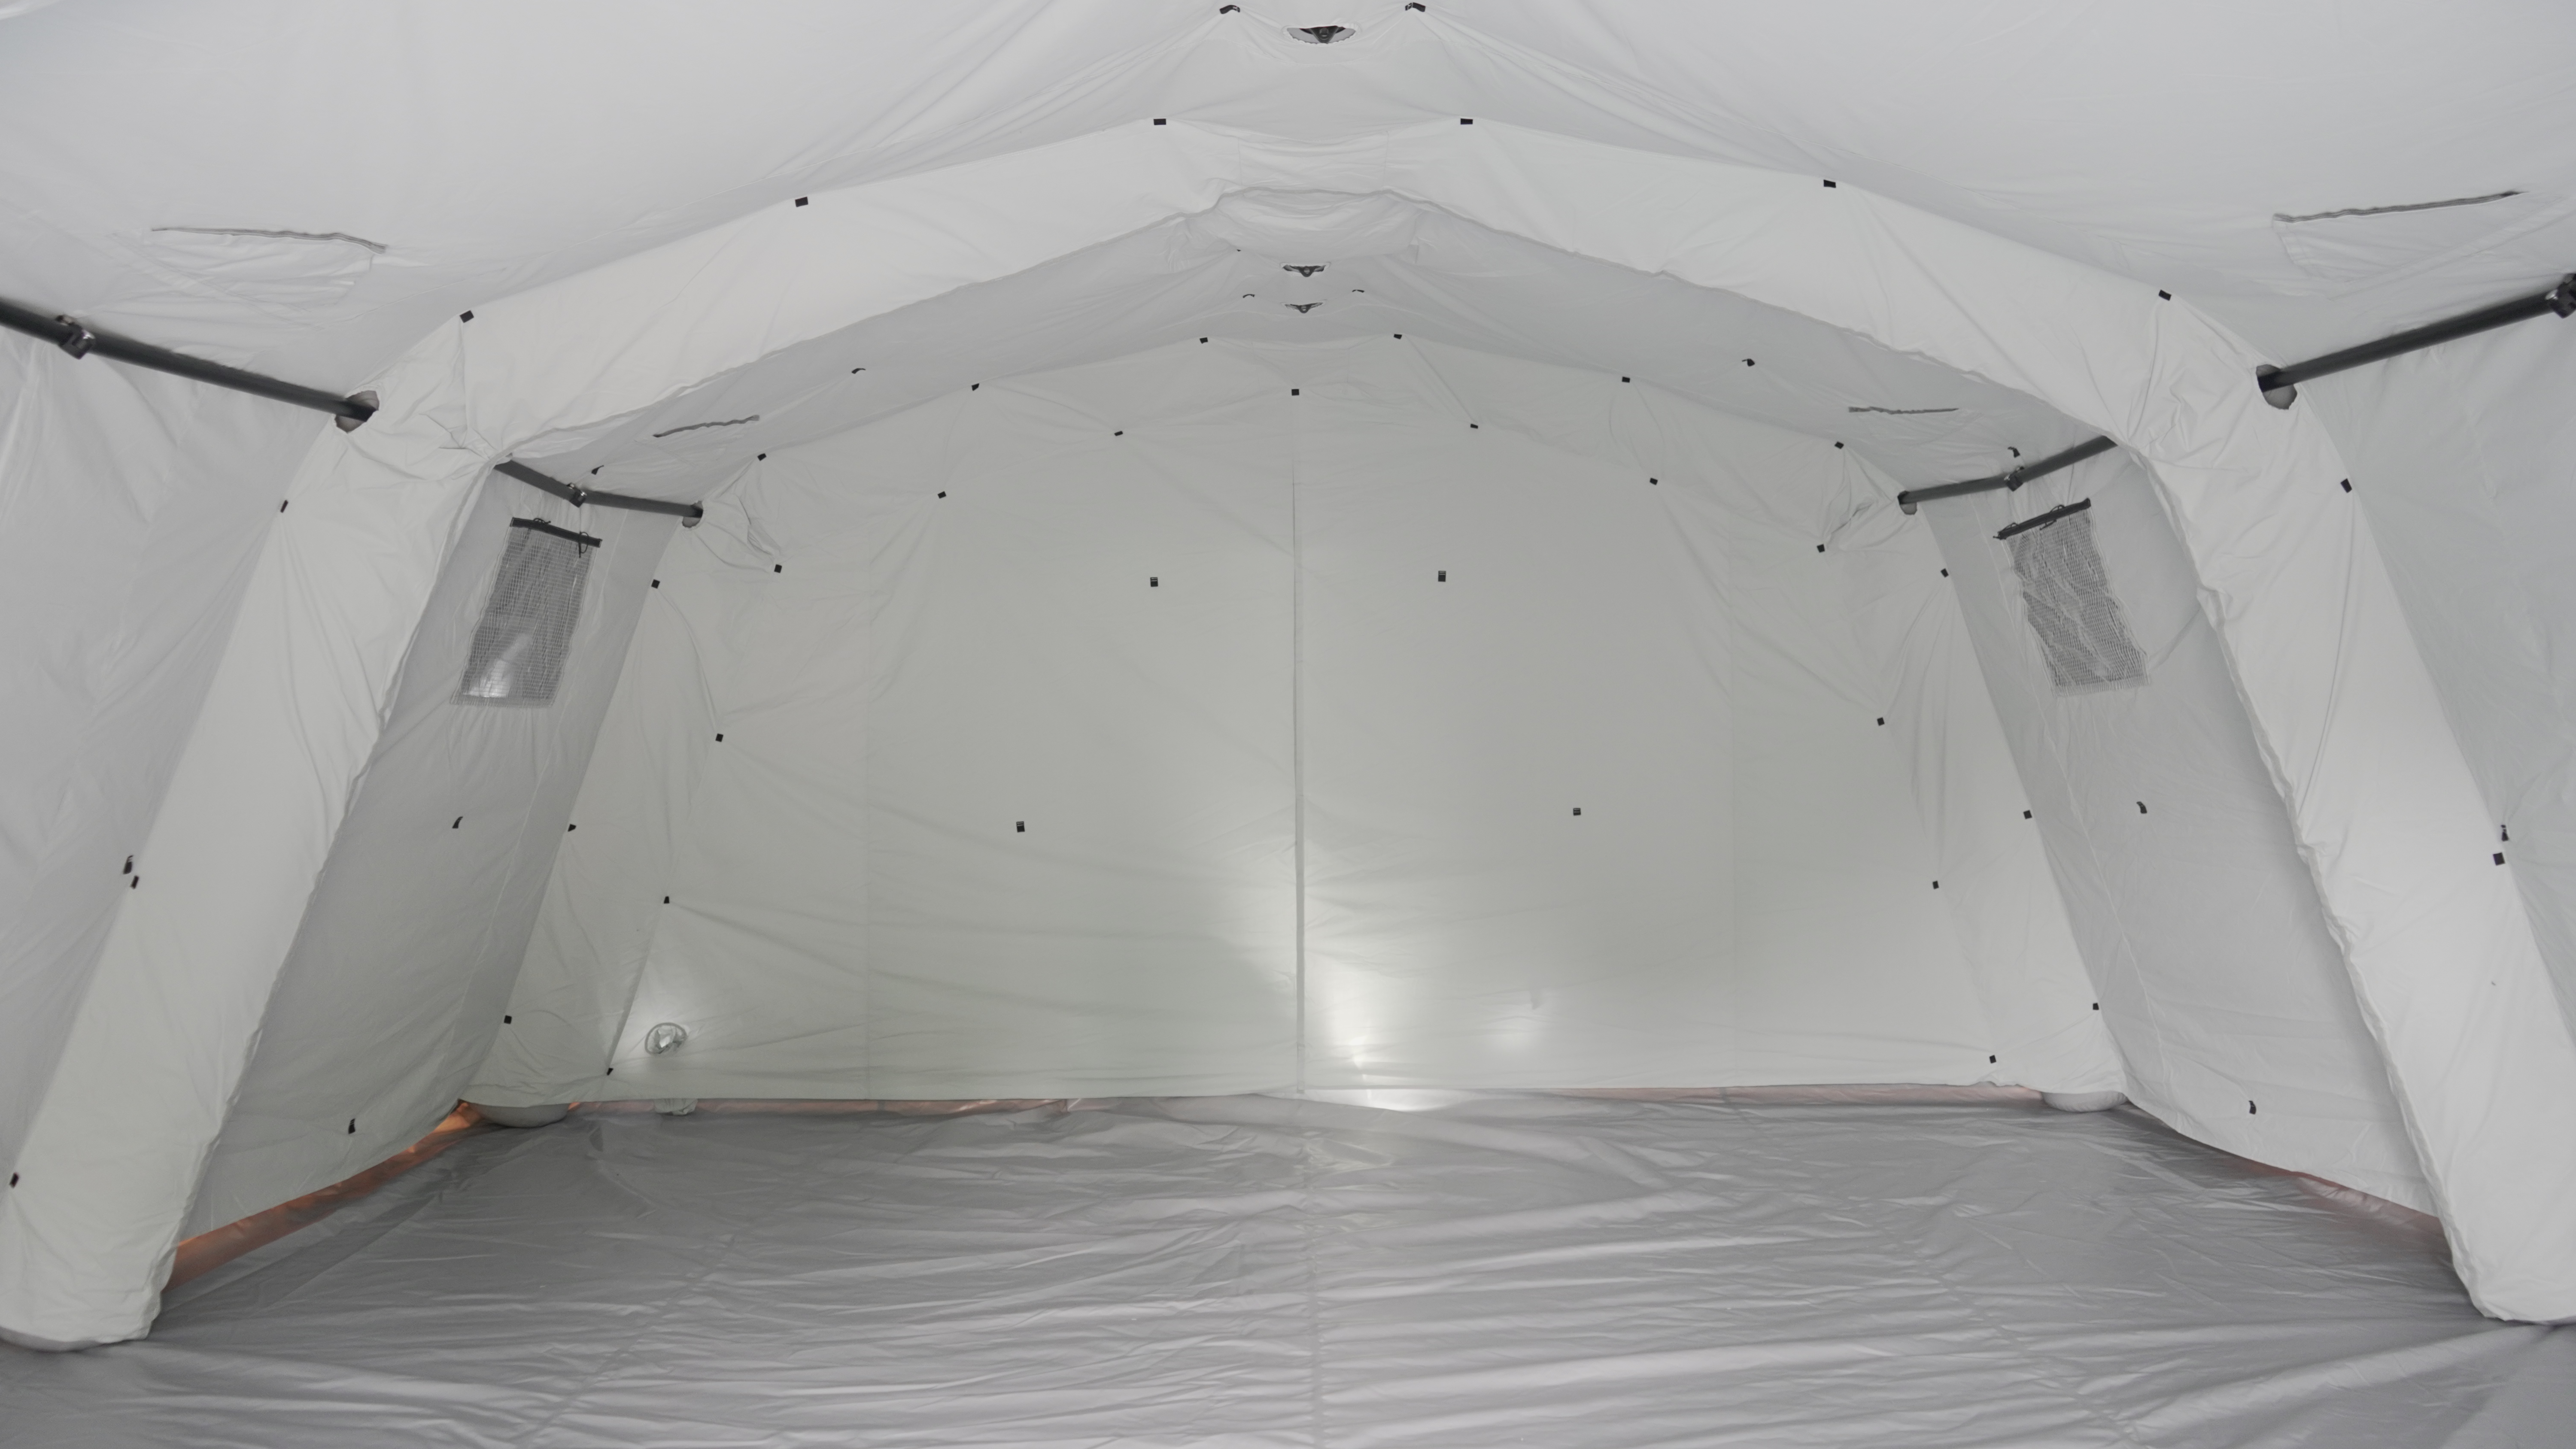 Medical, military Unlimited splice inflatable tent